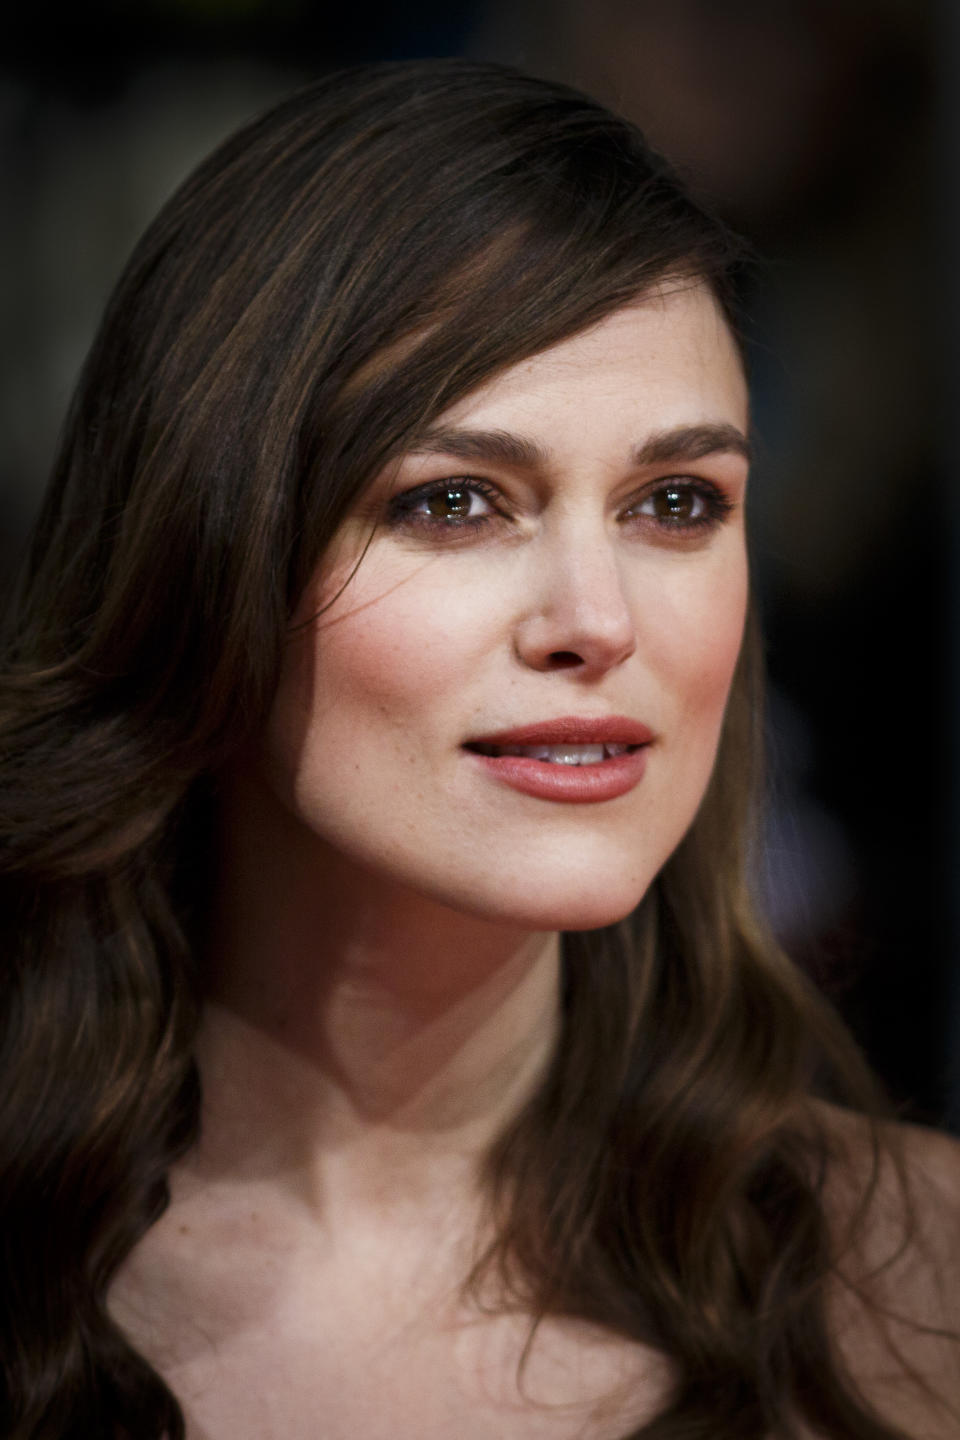 LONDON, ENGLAND - FEBRUARY 08:  Keira Knightly attends the EE British Academy Film Awards at The Royal Opera House on February 8, 2015 in London, England.  (Photo by Tristan Fewings/Getty Images)